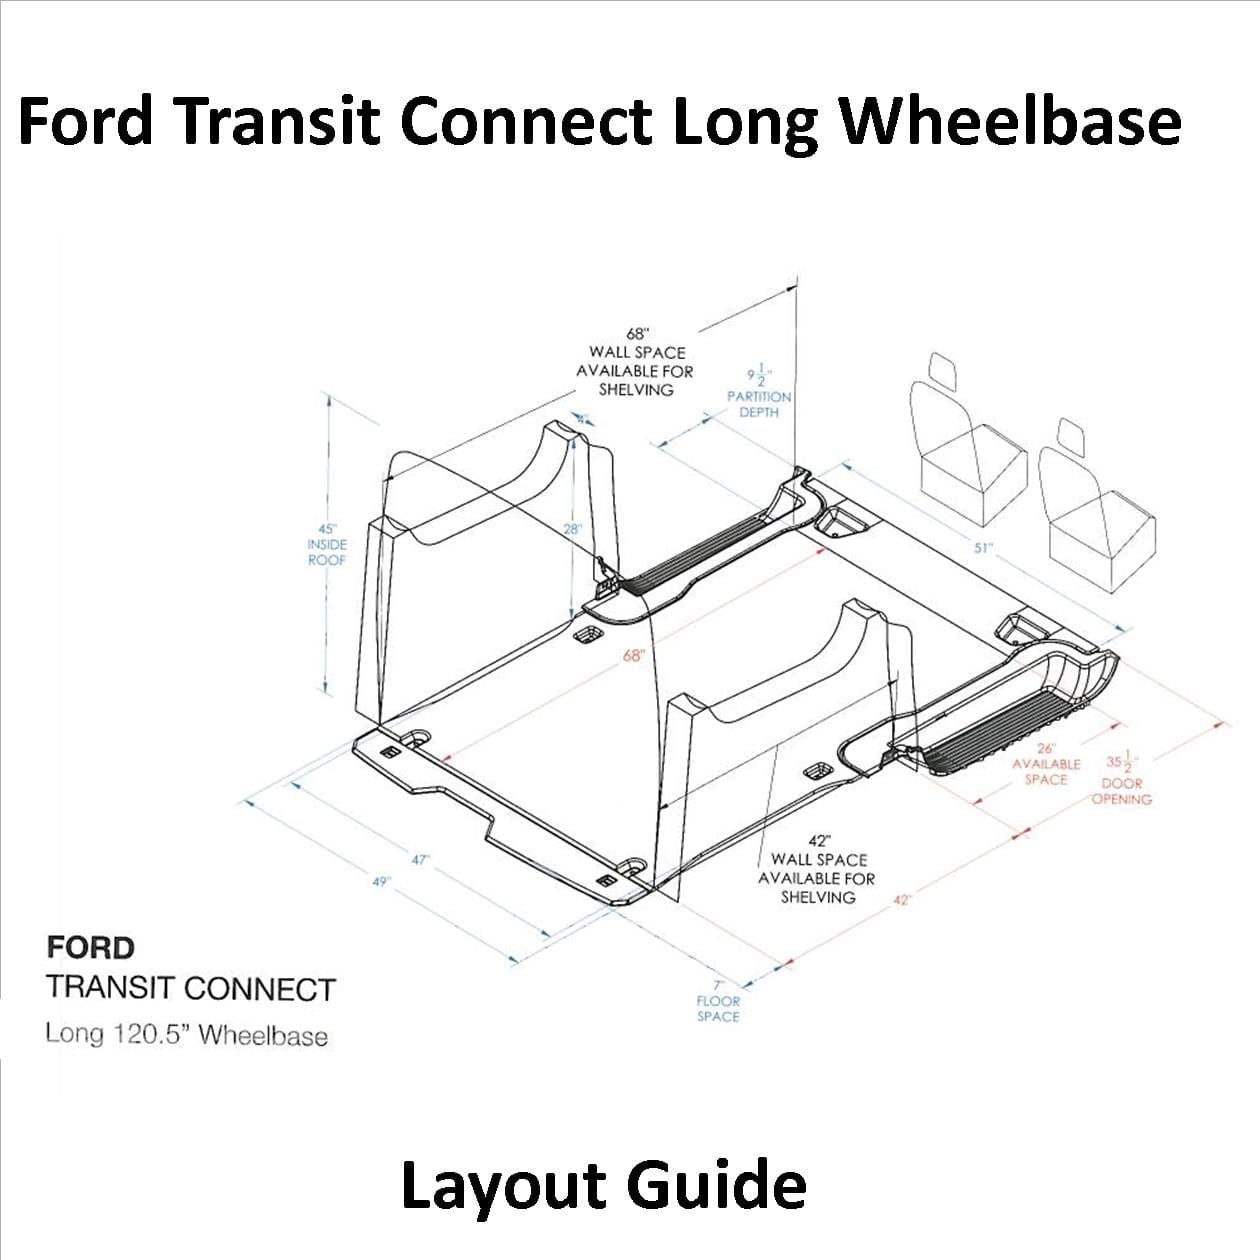 Ford Transit Connect Long Wheelbase Layout Guide U.S